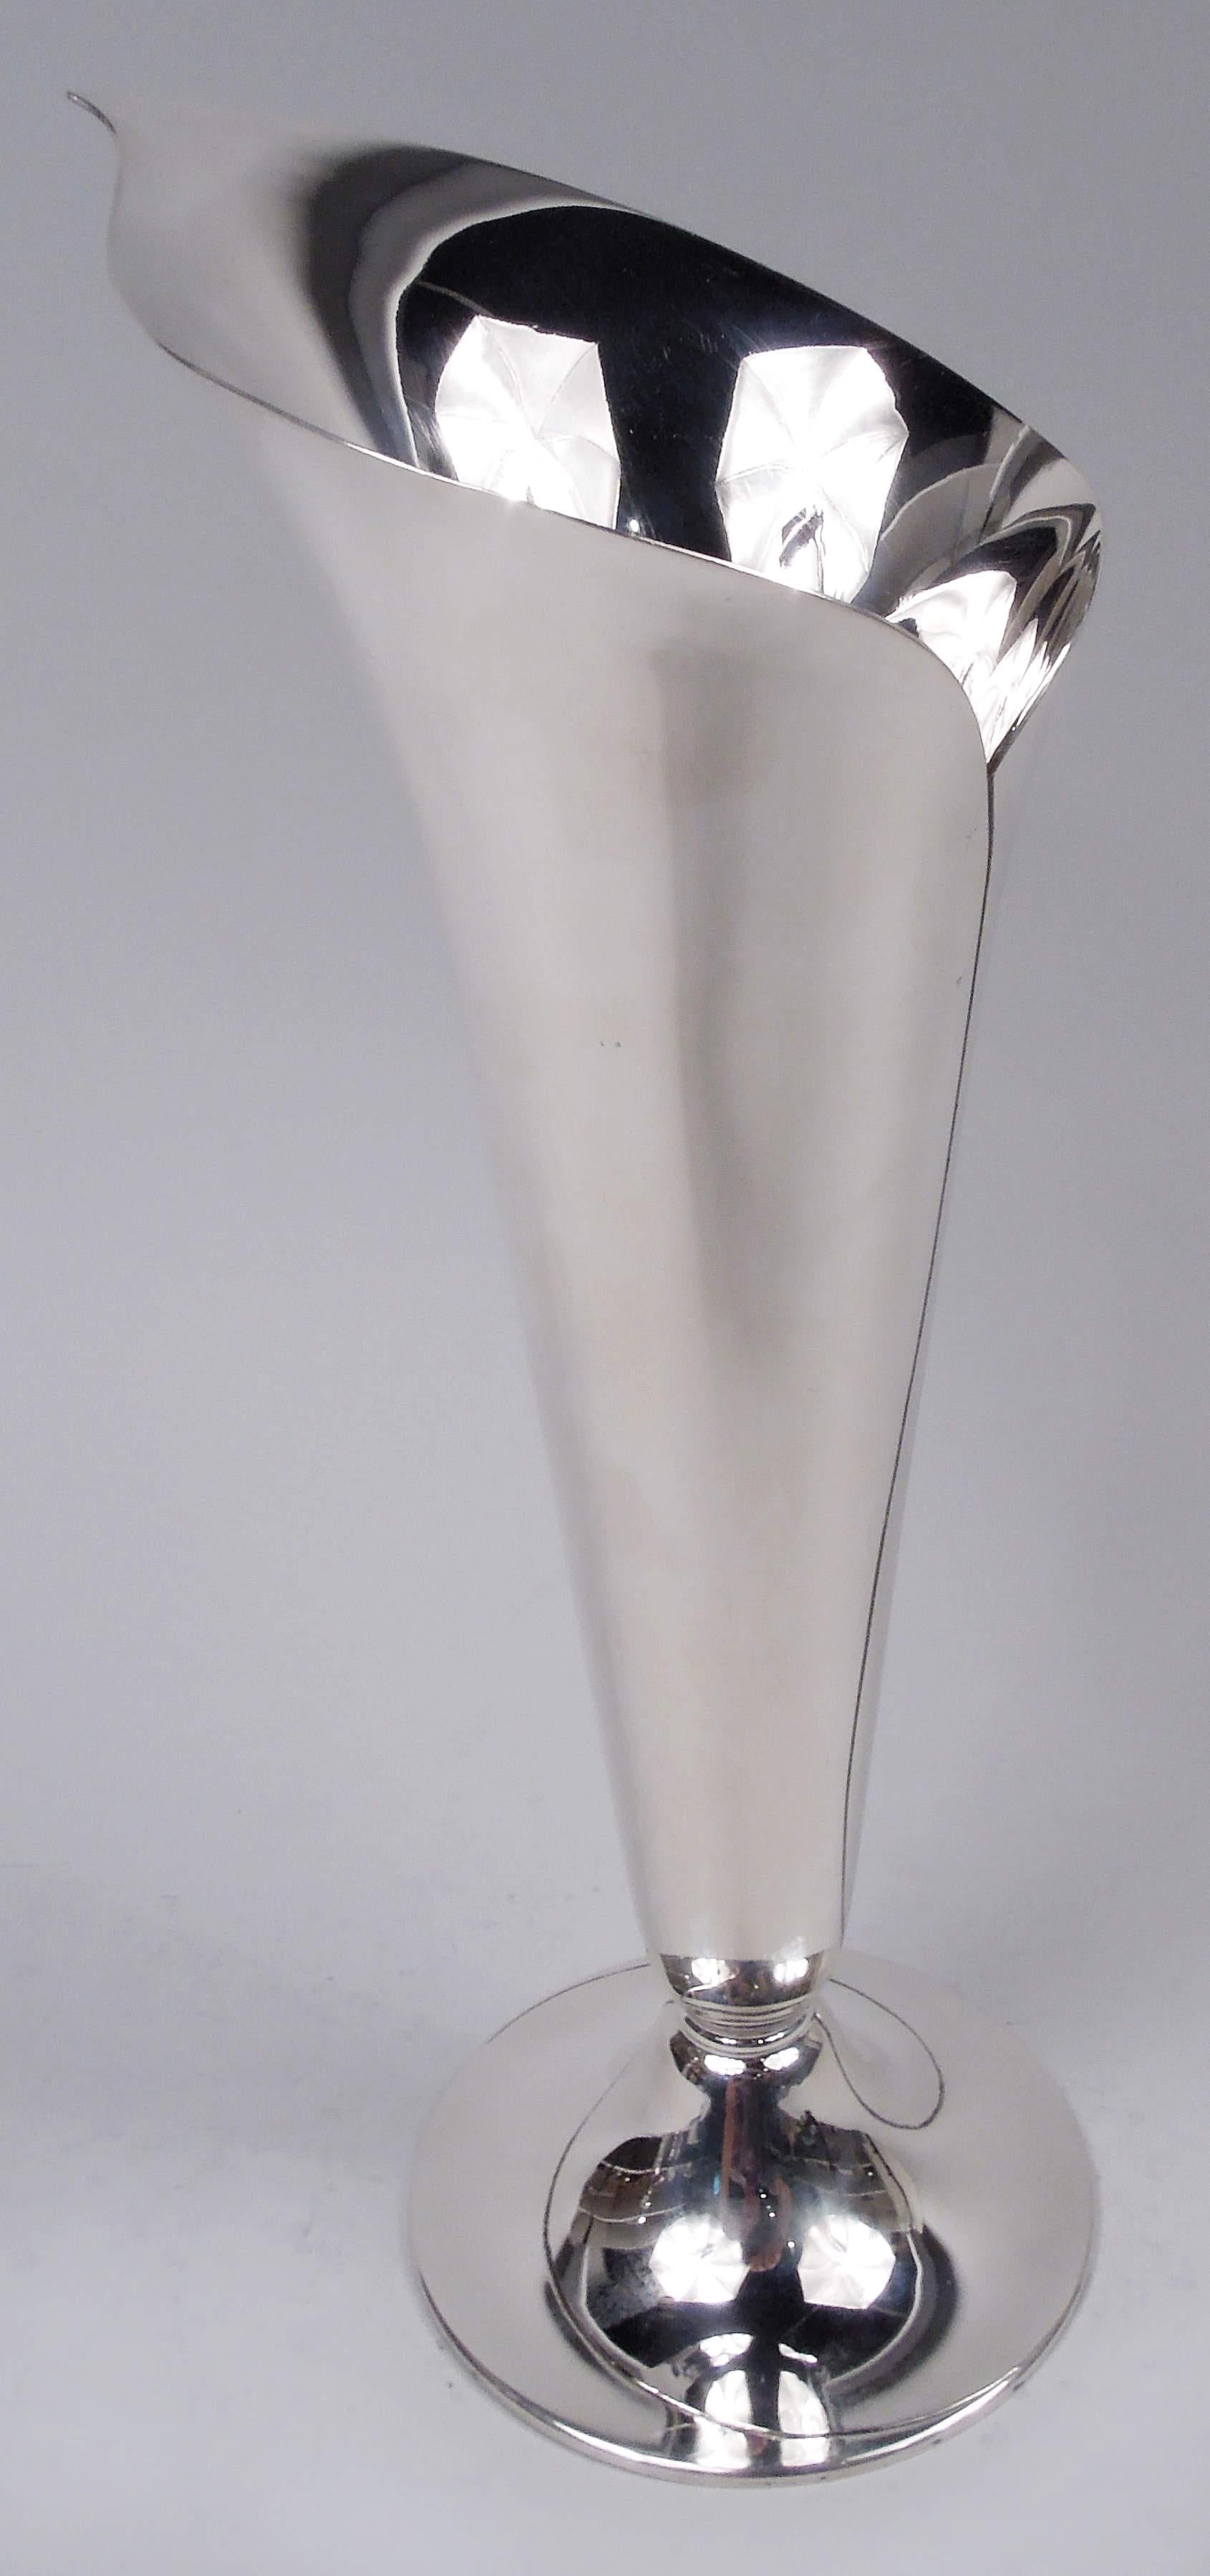 Classic Midcentury Modern sterling silver vase. Made by Tiffany & Co. in New York. In form of abstract calla lily with asymmetrical mouth and irregular seam. Raised round foot. Fully marked including maker’s stamp, postwar pattern no. 23425, and